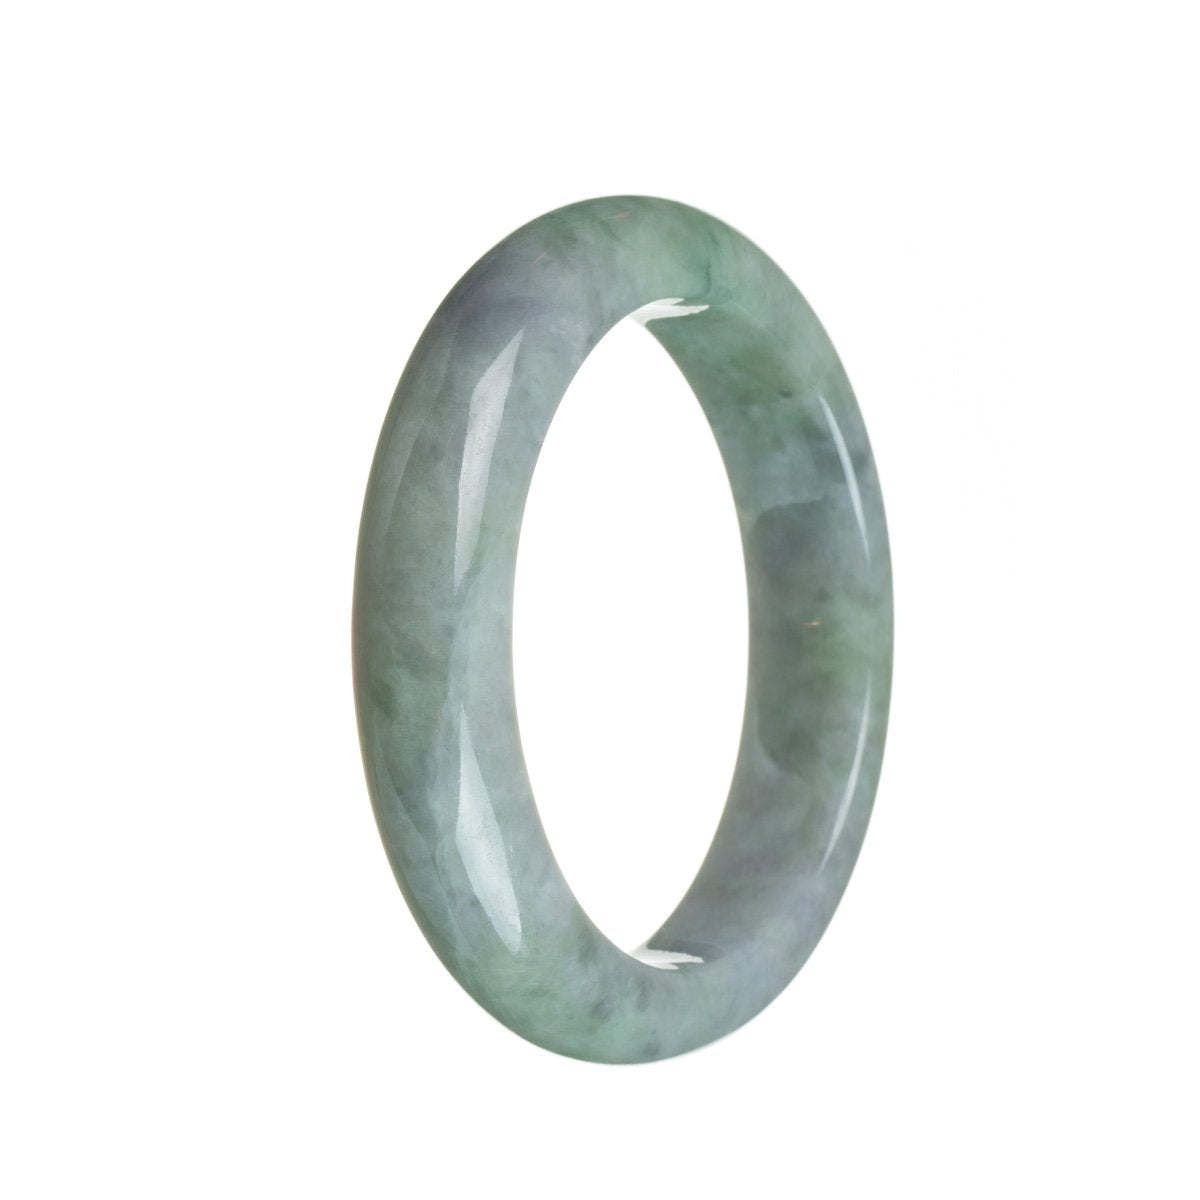 A lavender-colored jade bracelet with a semi-round shape and a traditional green design, measuring 55mm in size.